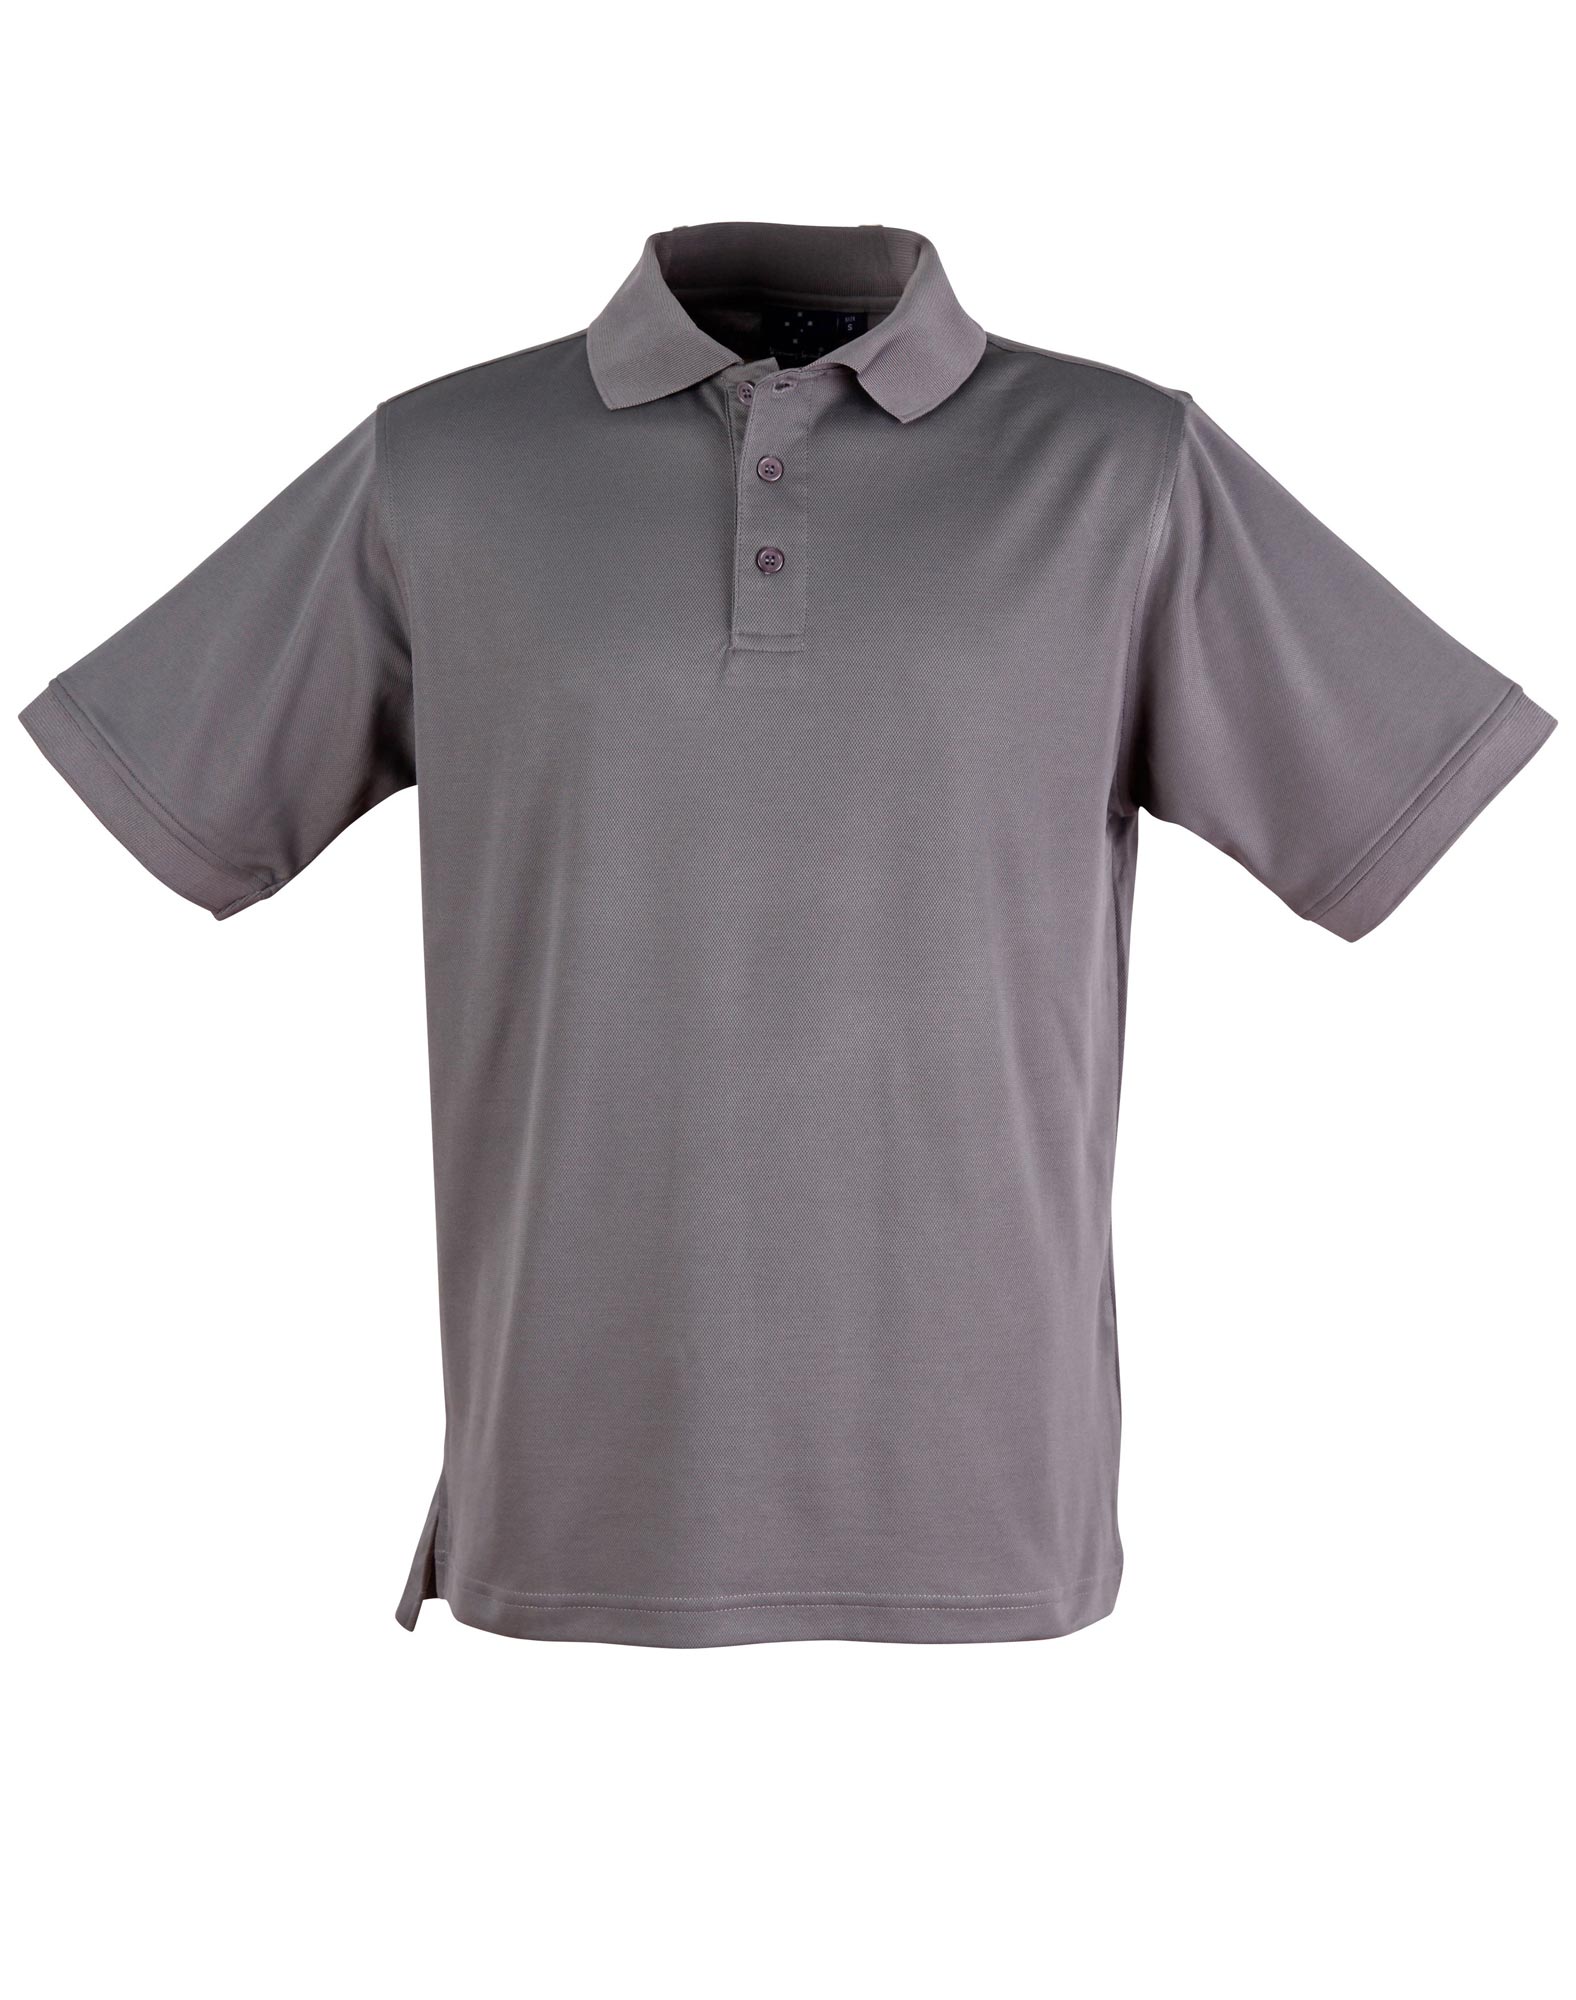 PS33/PS34b VICTORY POLO Men’s&Ladies’